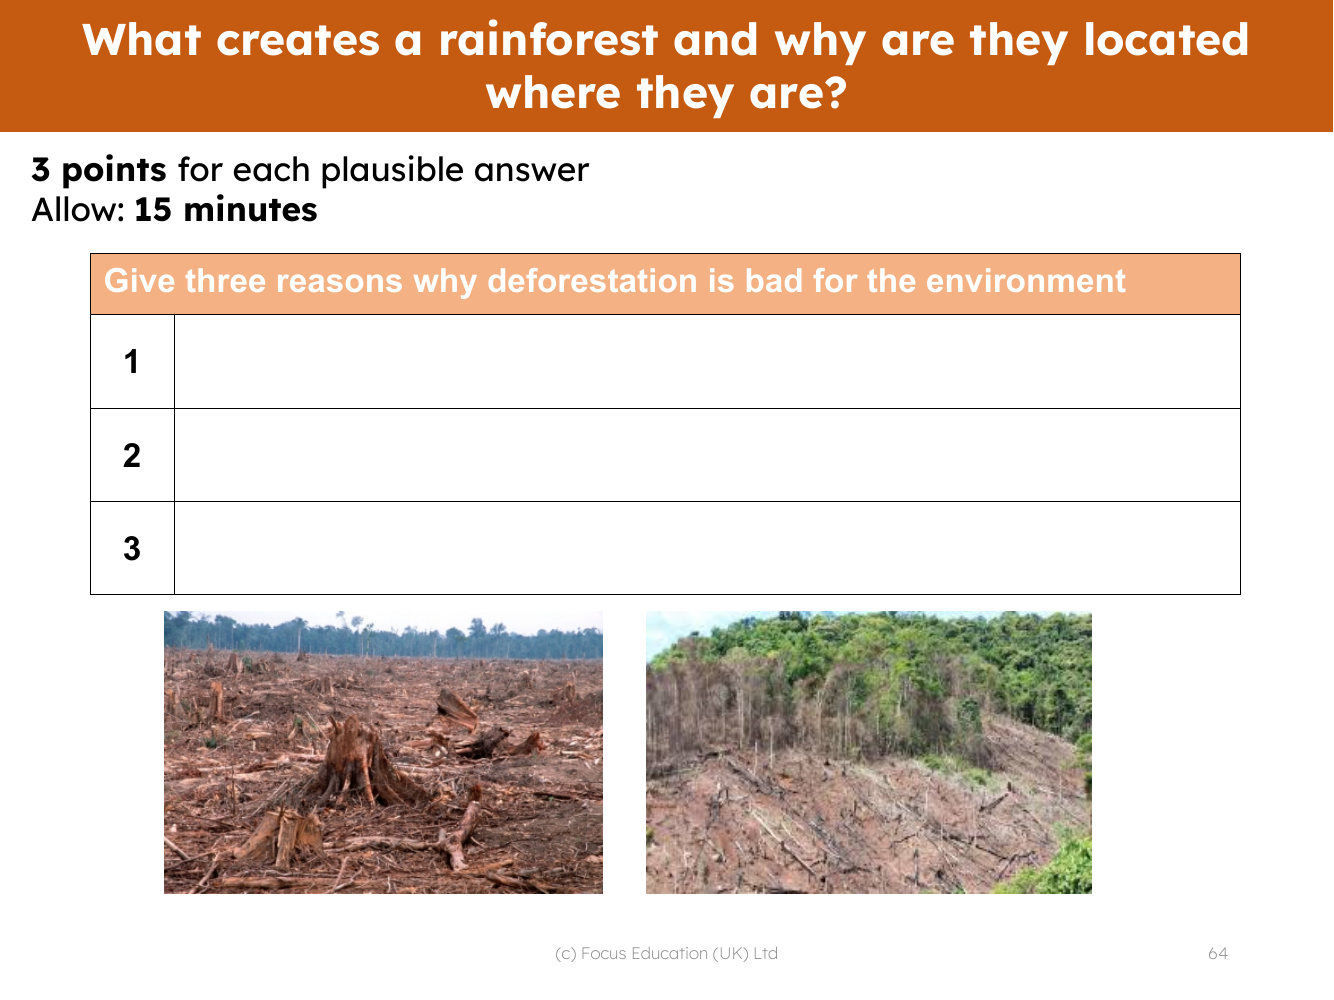 Three reasons - Why deforestation is bad for the environment